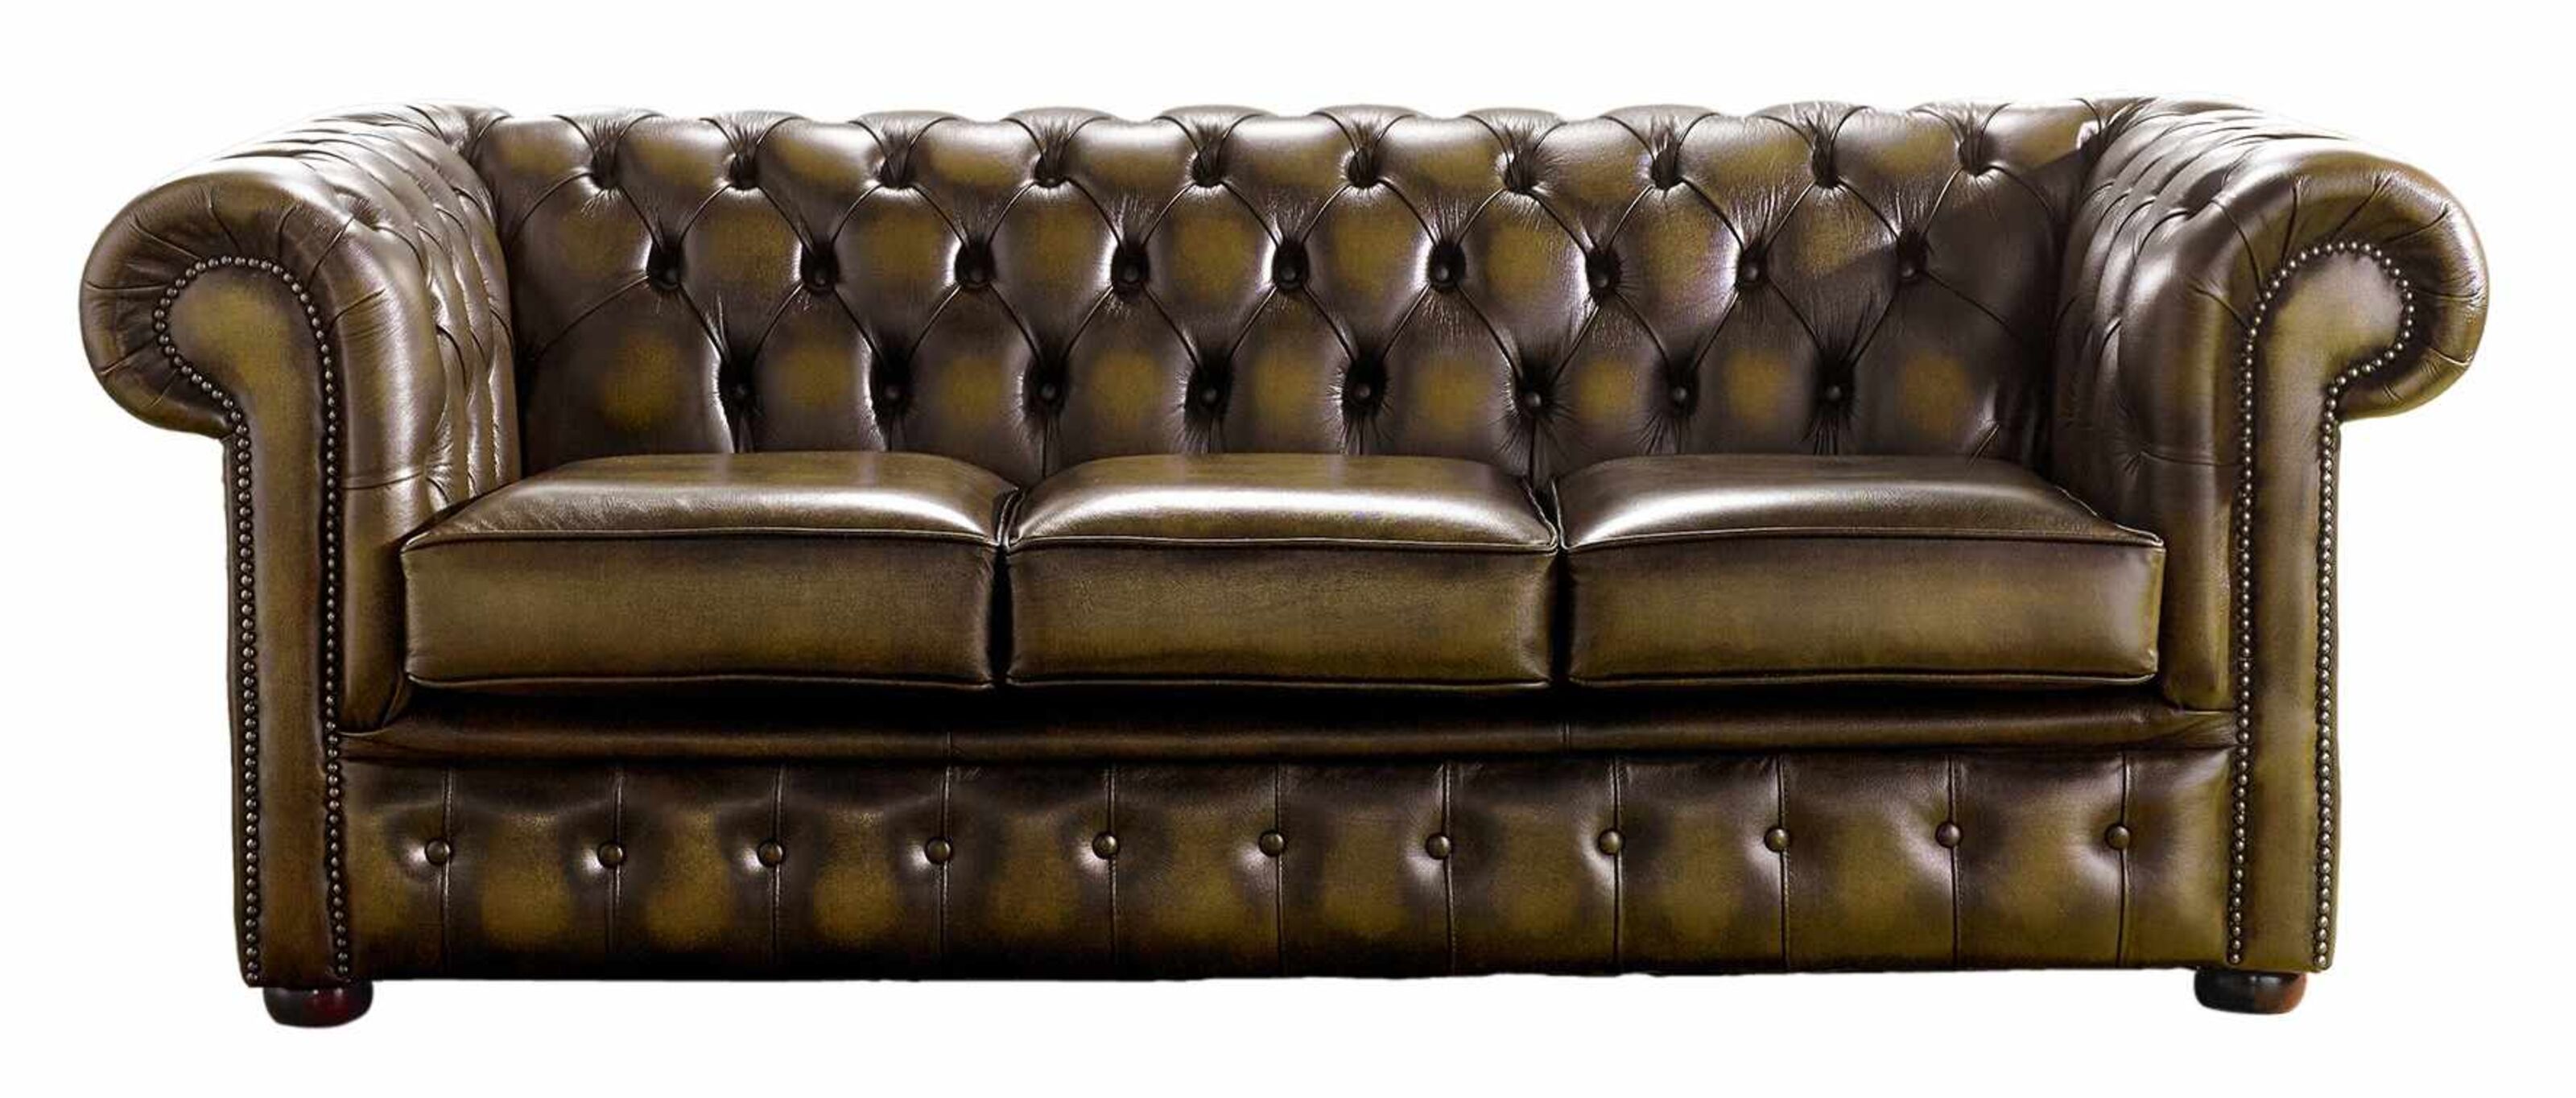 Luxurious Lounging Discover the Comfort of Chesterfield Sofas  %Post Title